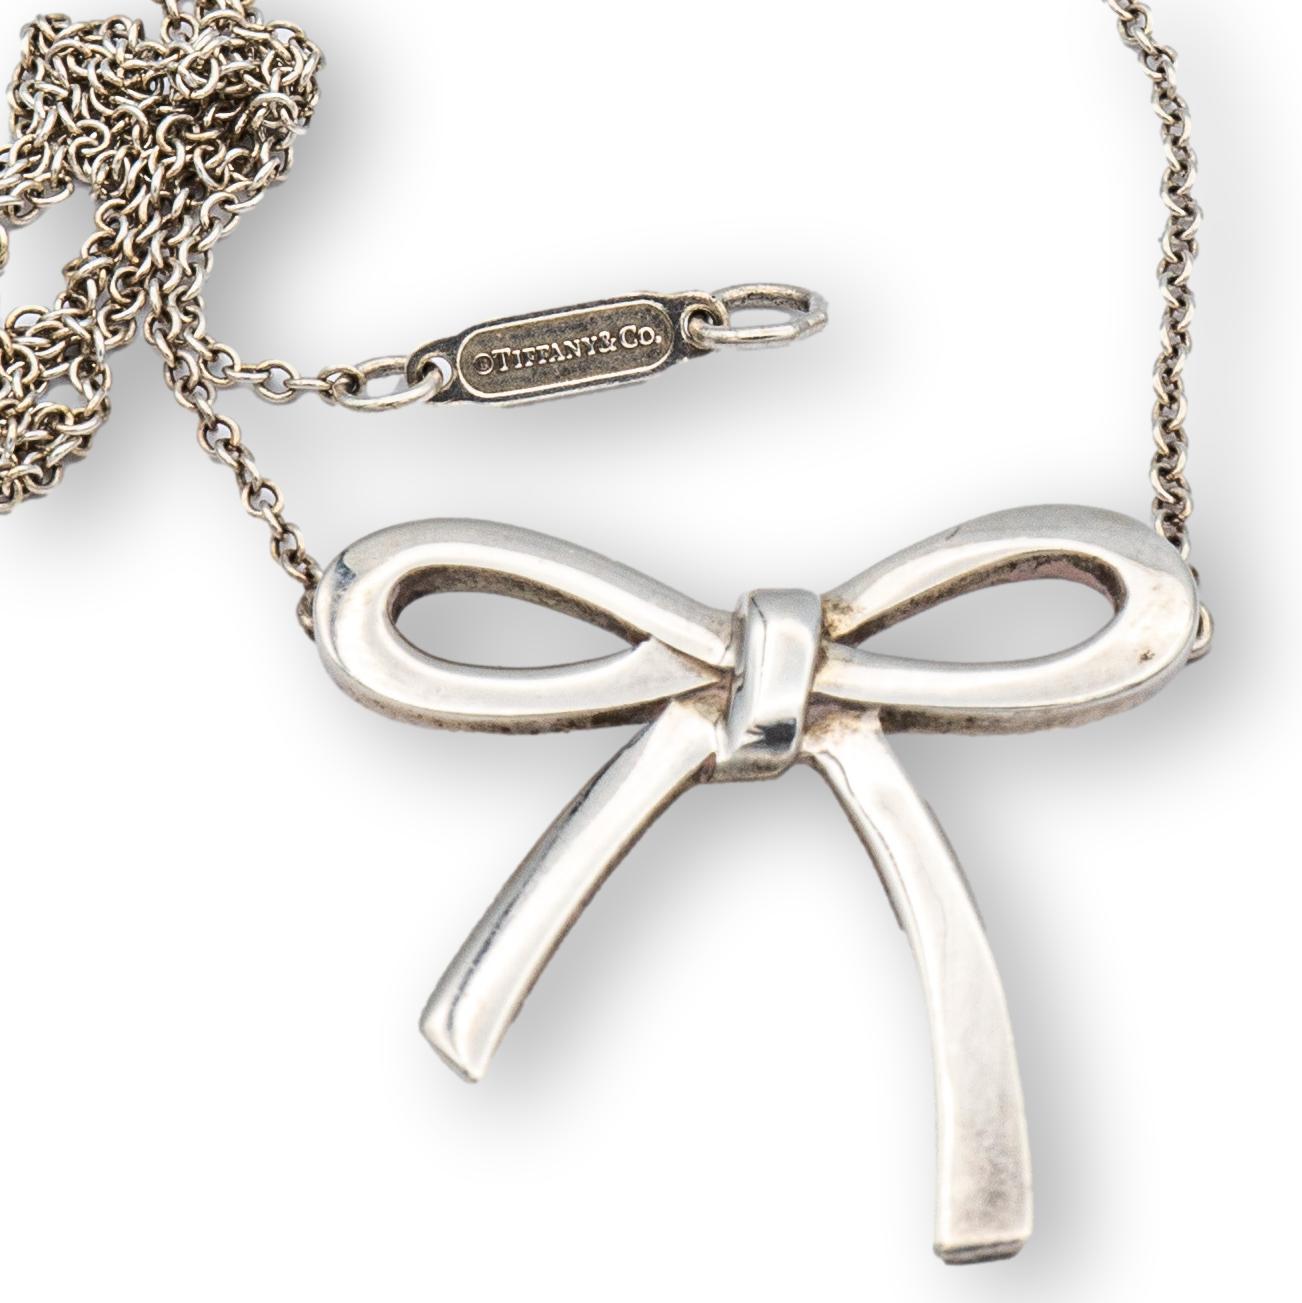 Tiffany & Co. bow necklace finely crafted in sterling silver with link necklace and spring ring closure clasp. The bow pendant is stationary and measures 0.75